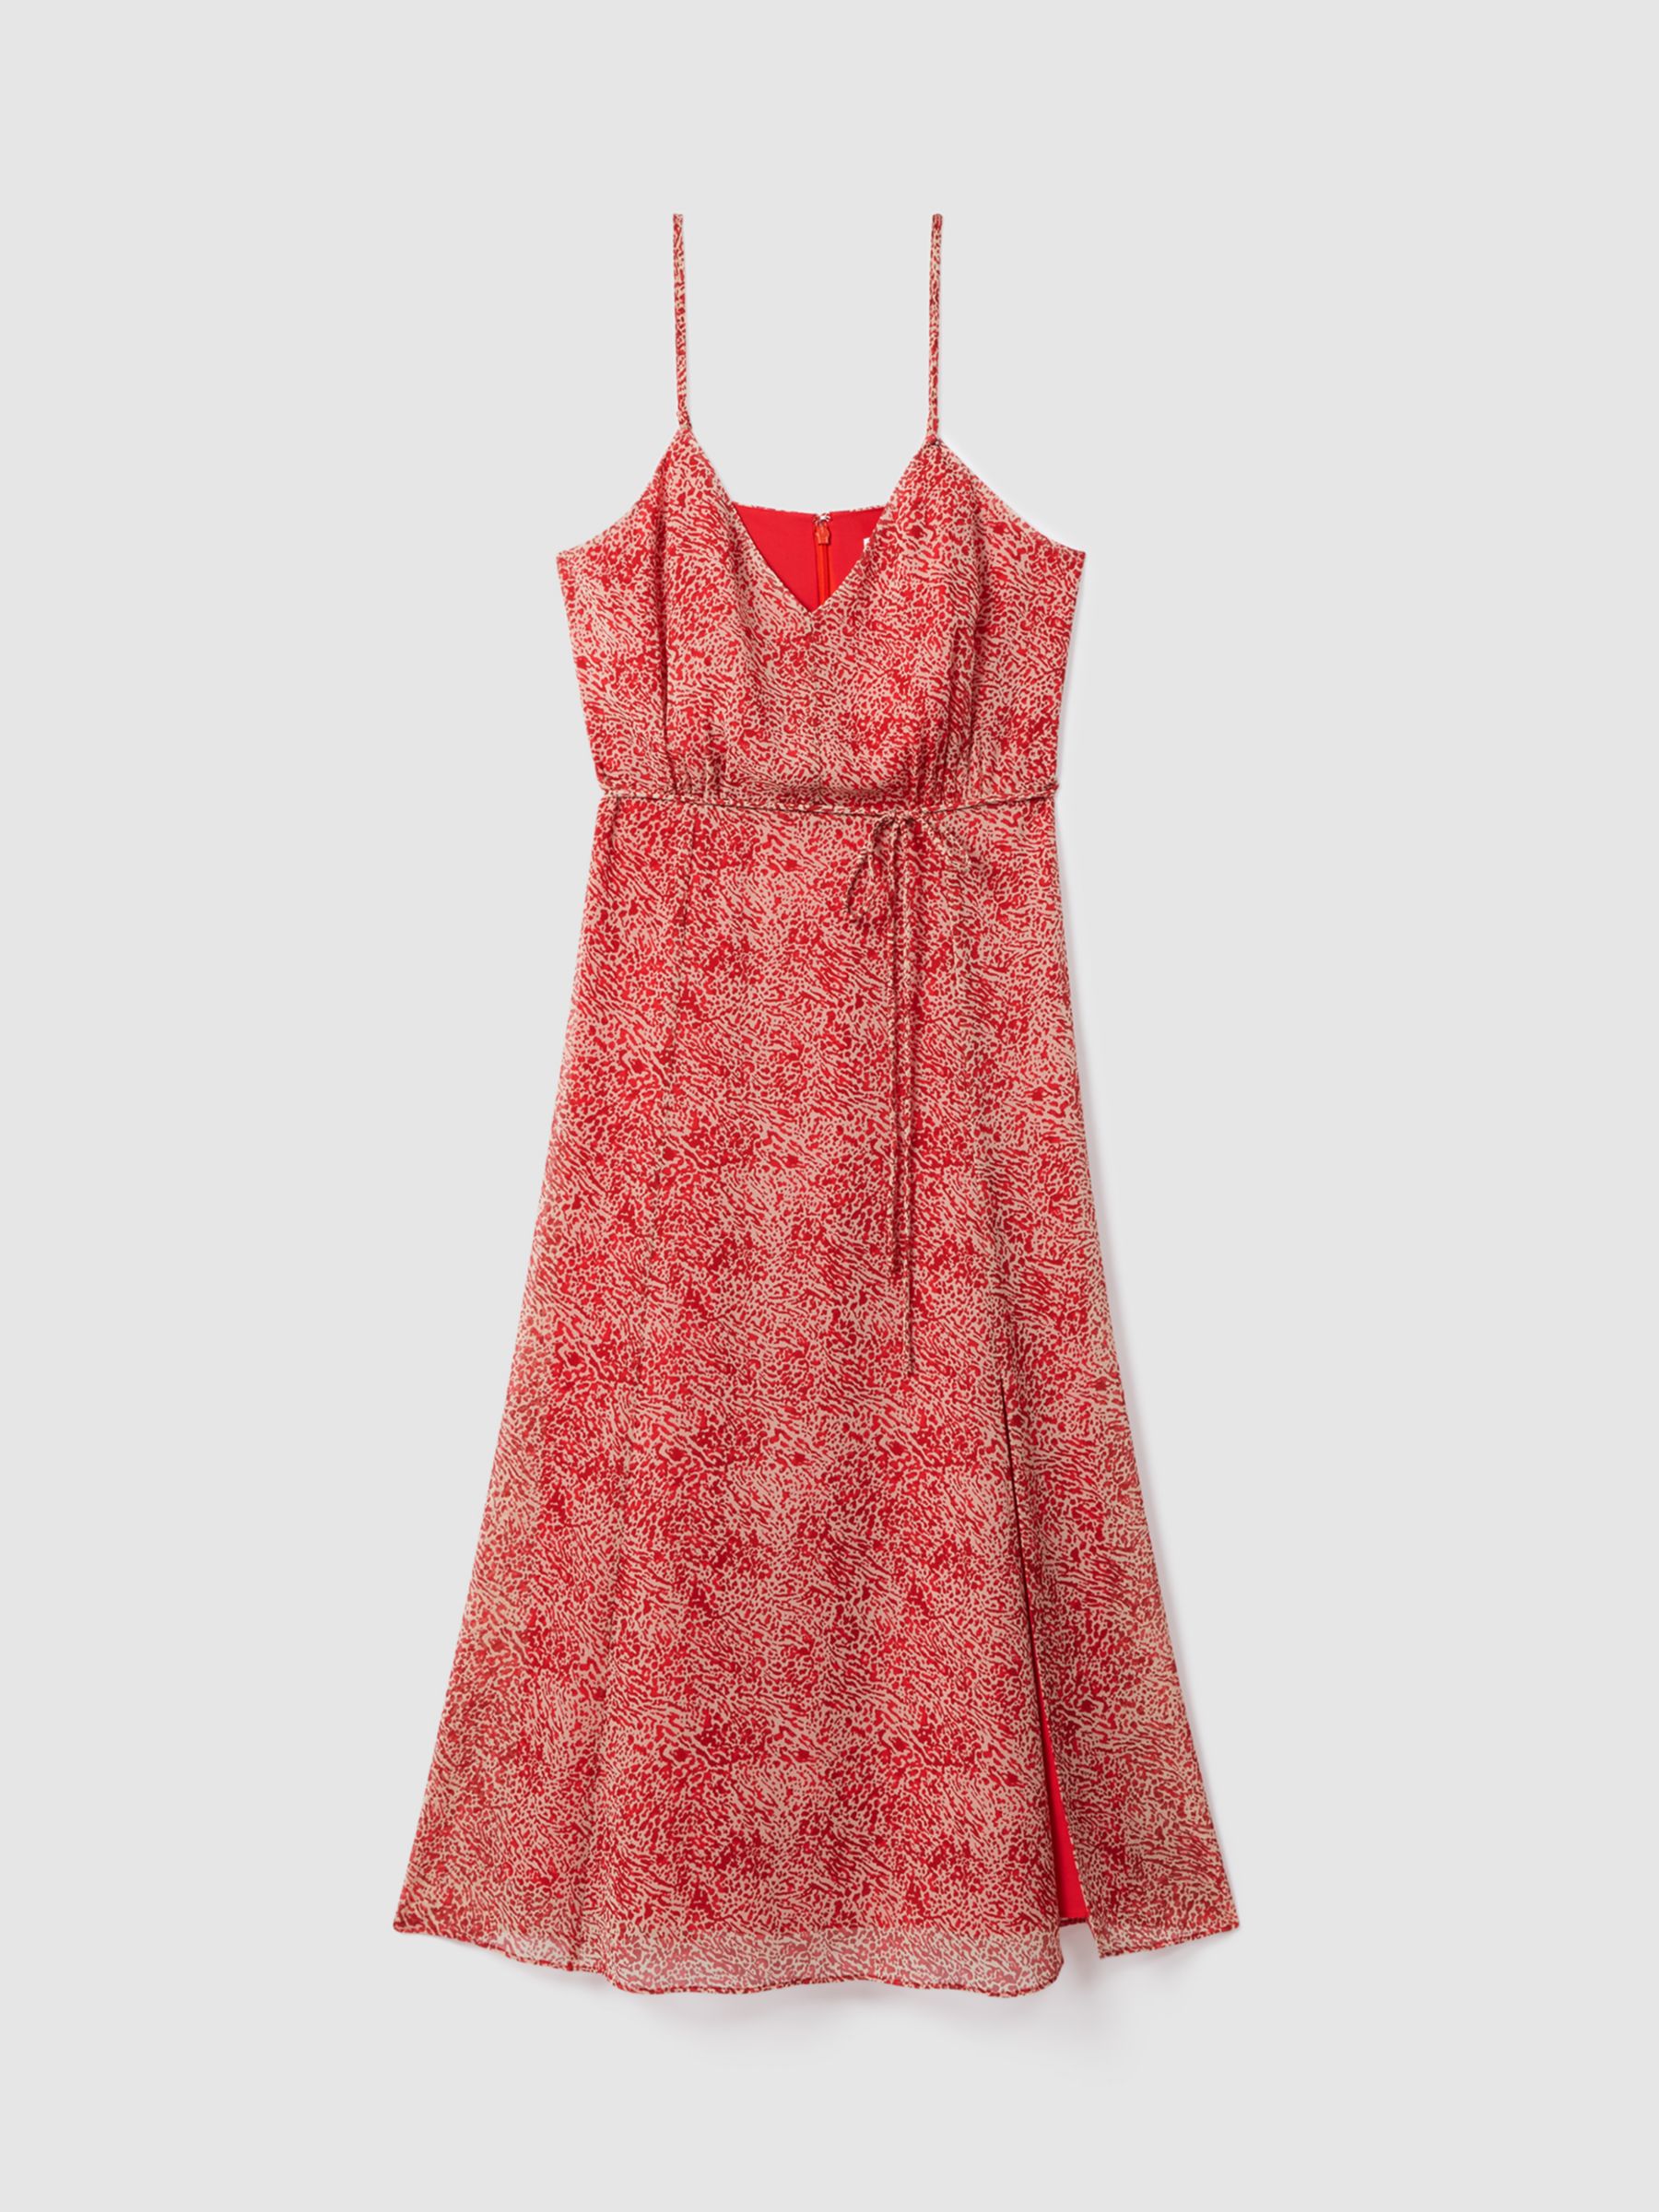 Reiss Petite Olivia Abstract Print Strappy Midi Dress, Red/Nude, 6